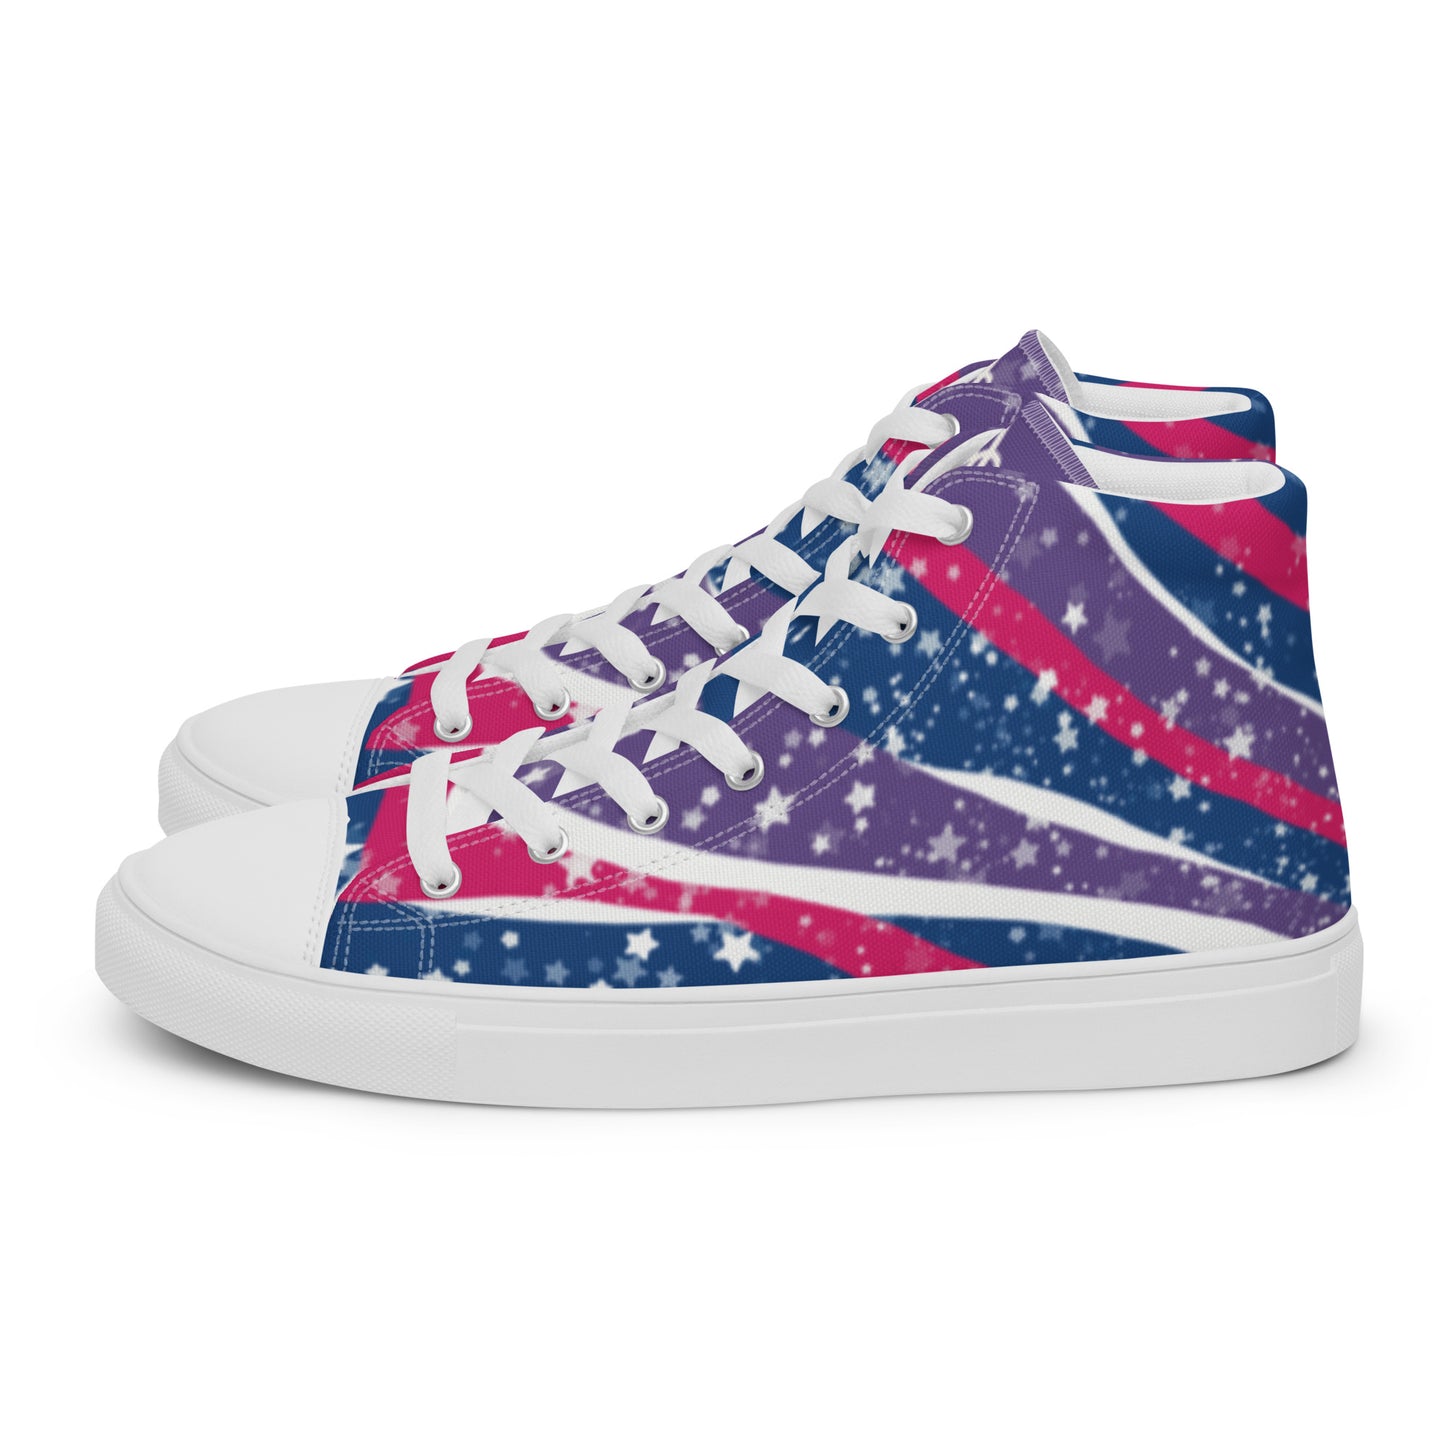 Left view: a pair of high top shoes with pink, purple, and blue ribbons that get larger from heel to laces, white stars, and the Aras Sivad logo on the tongue.